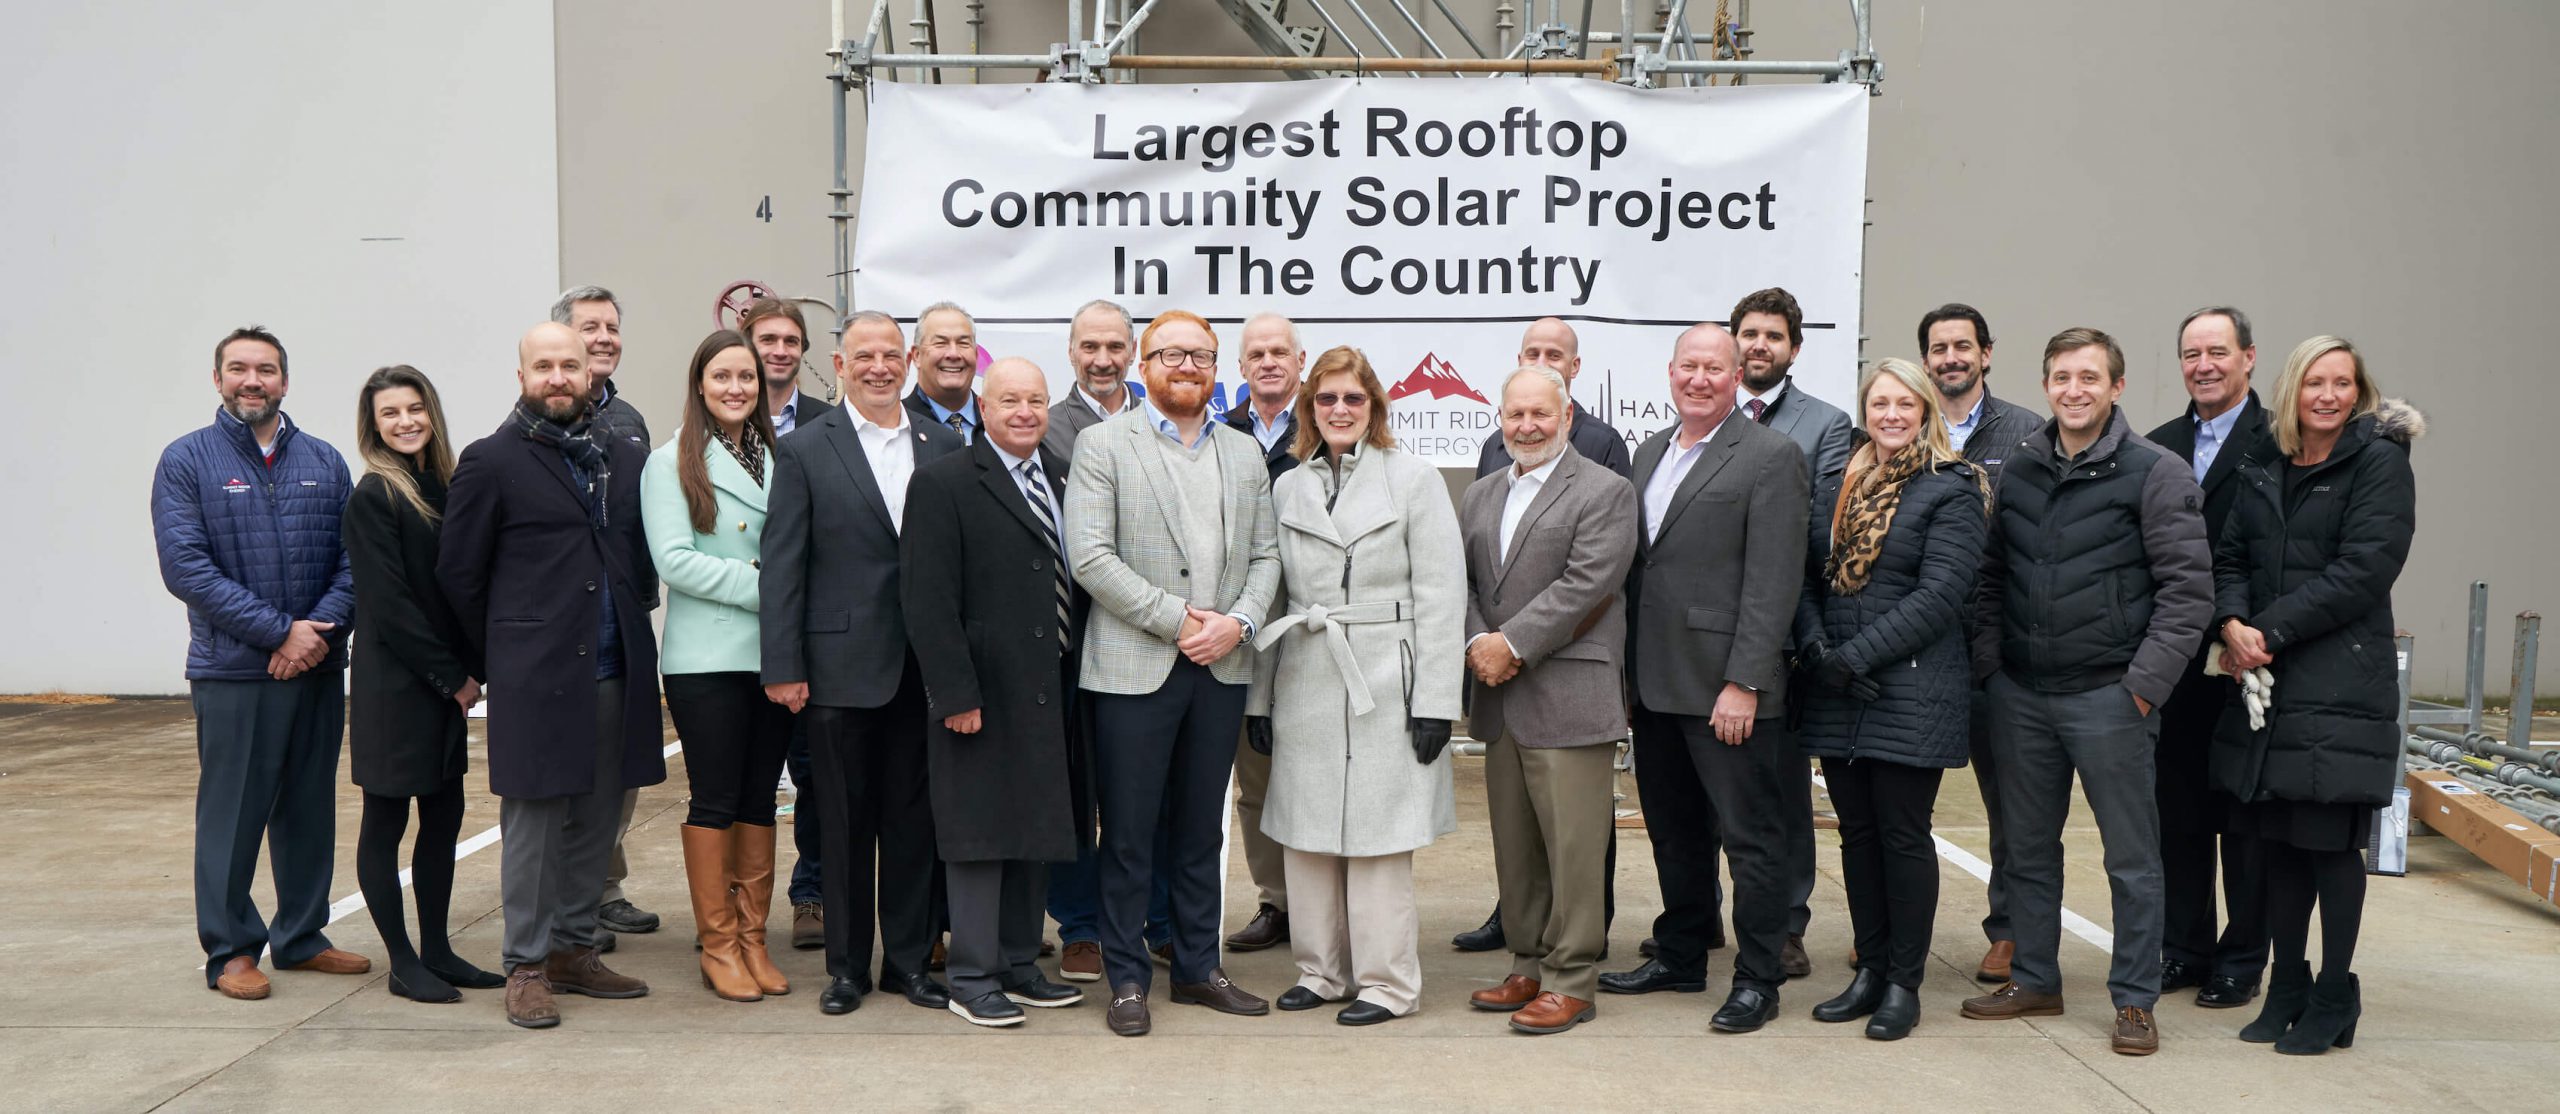 Hannon Armstrong jumps into community solar